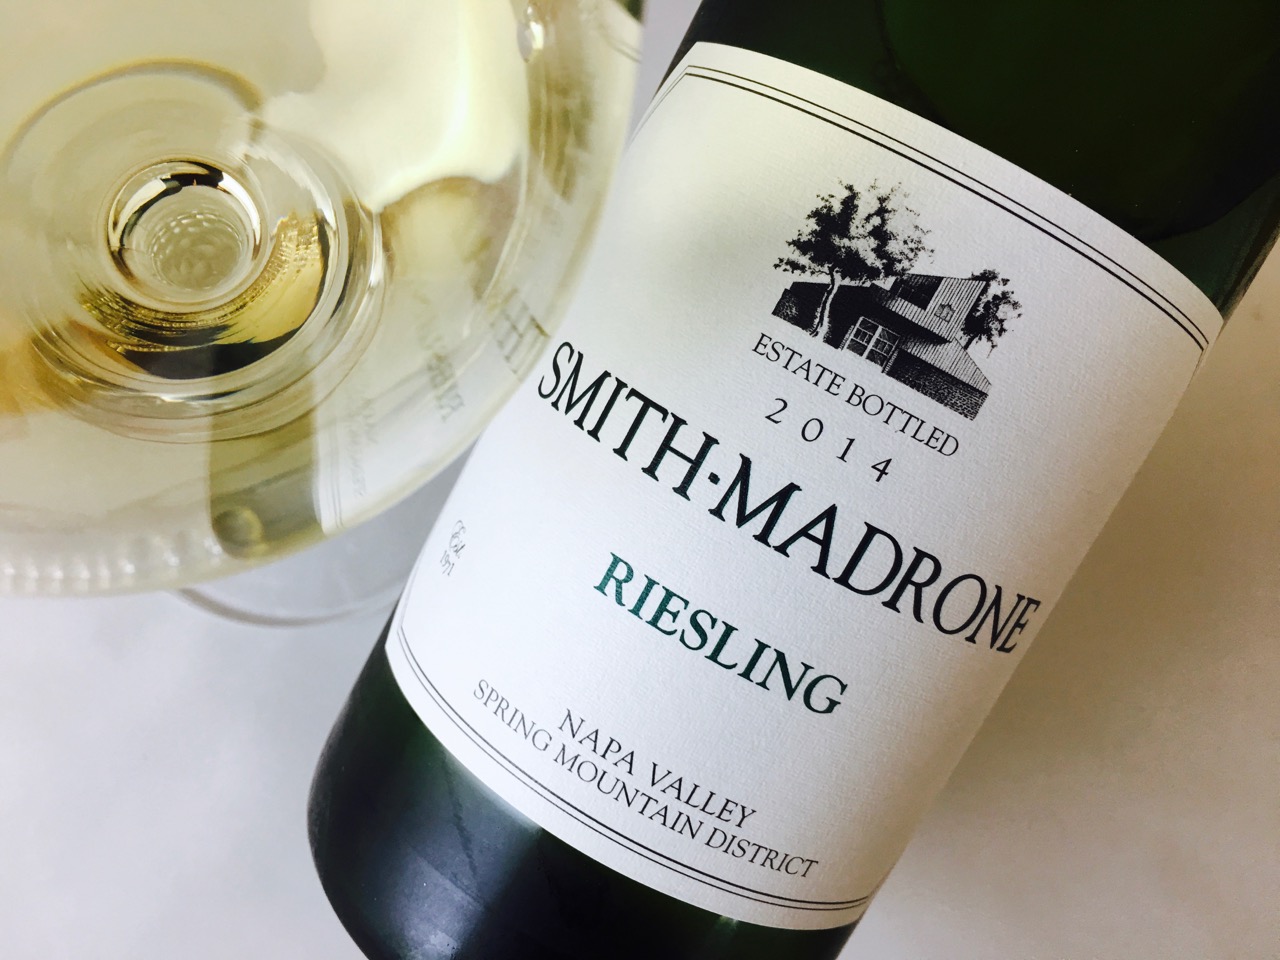 2014 Smith-Madrone Riesling Spring Mountain District Napa Valley